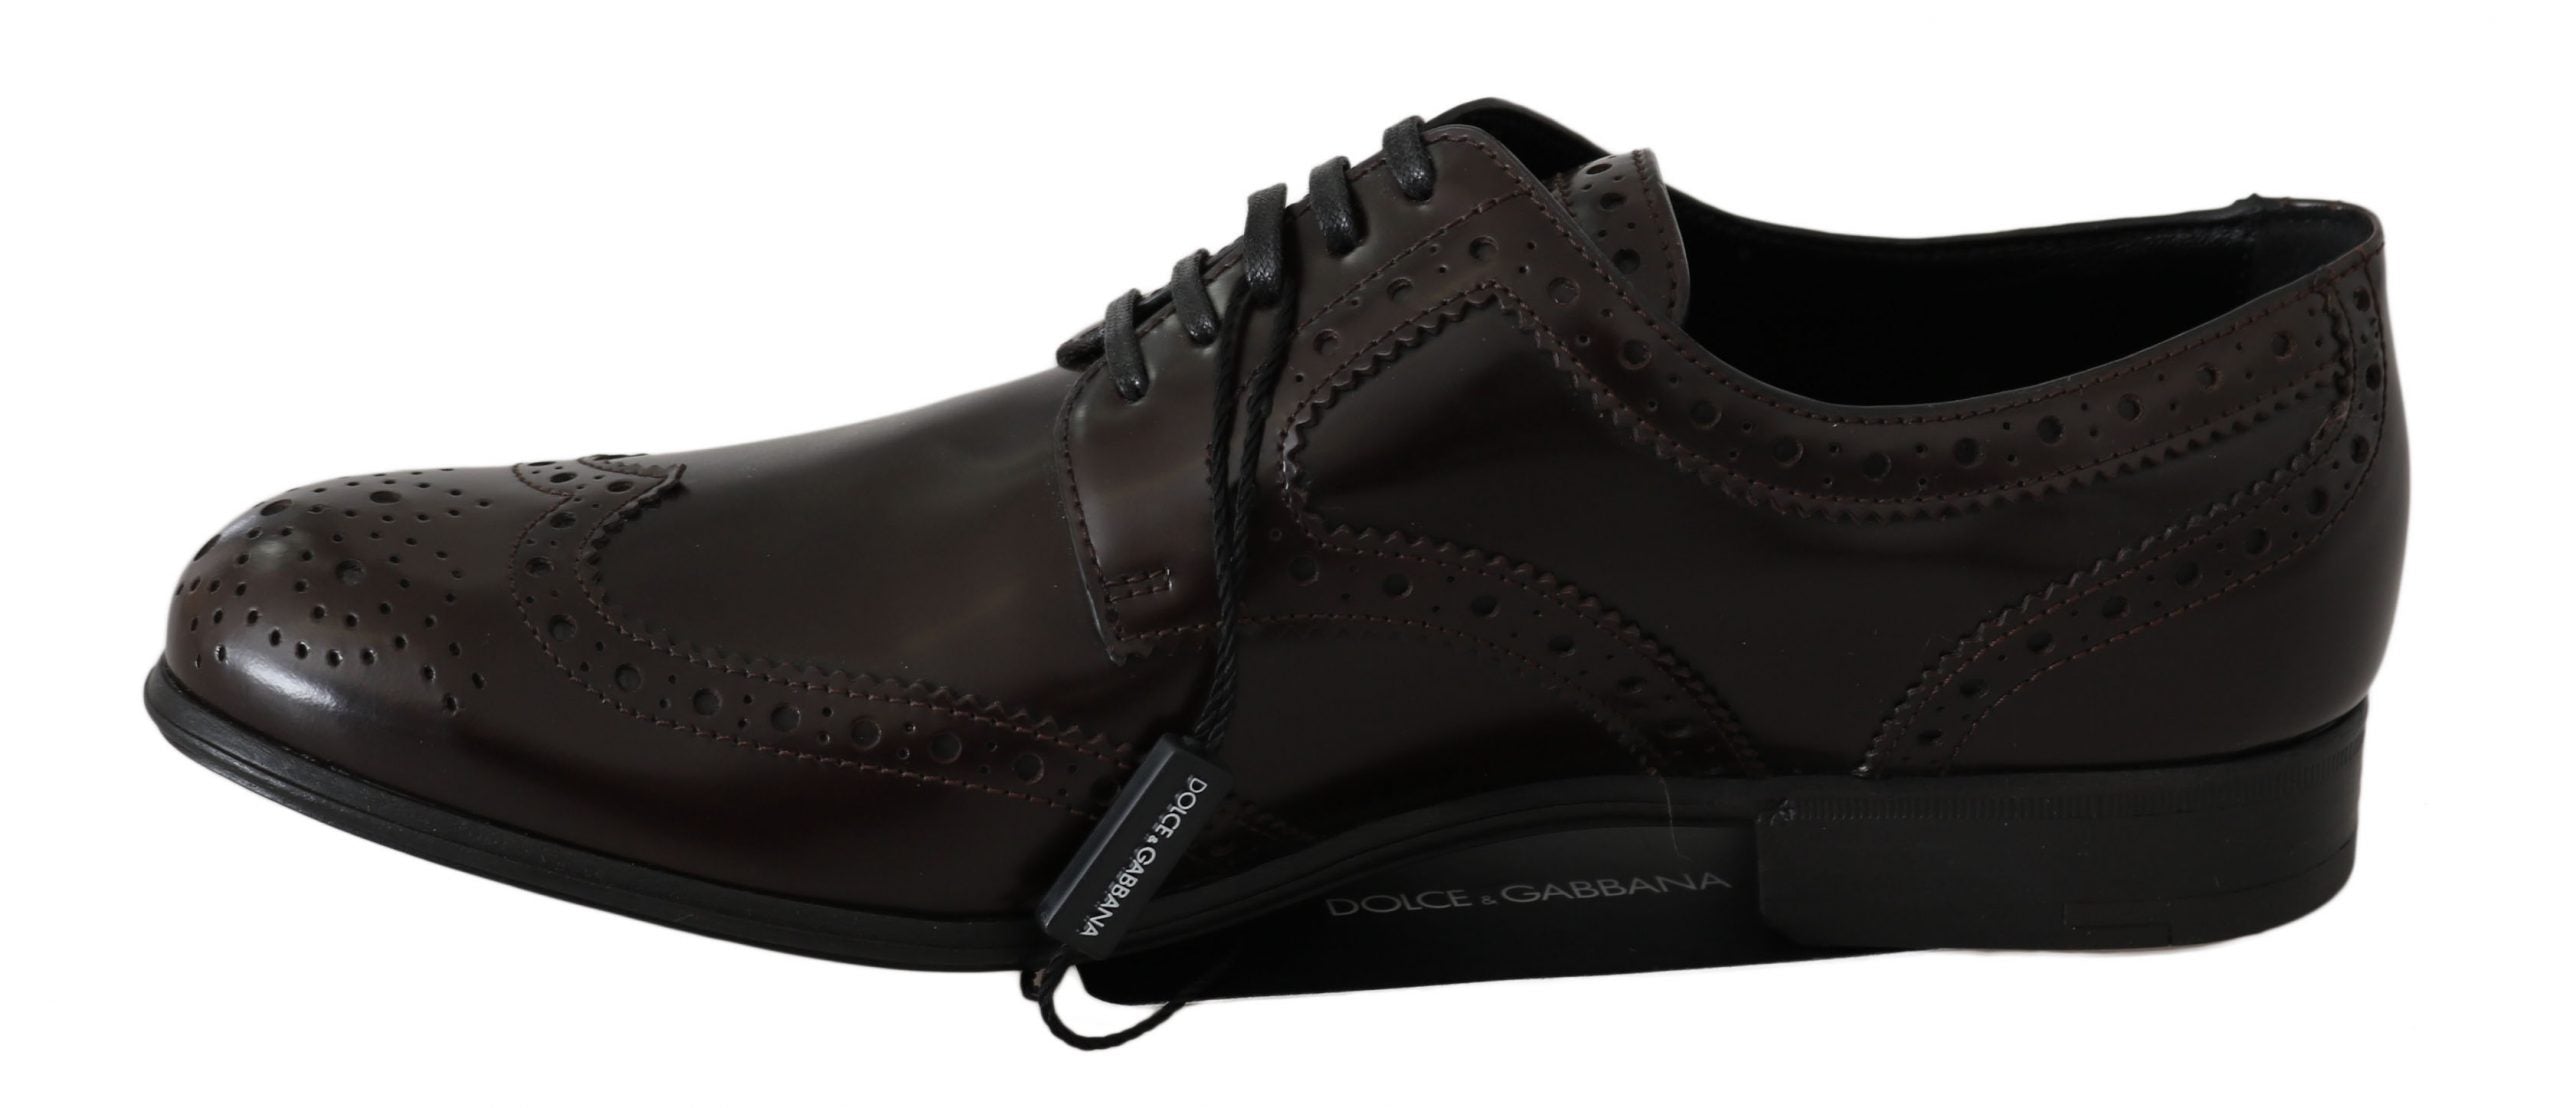 Dolce & Gabbana Brown Leather Broques Oxford Wingtip Shoes